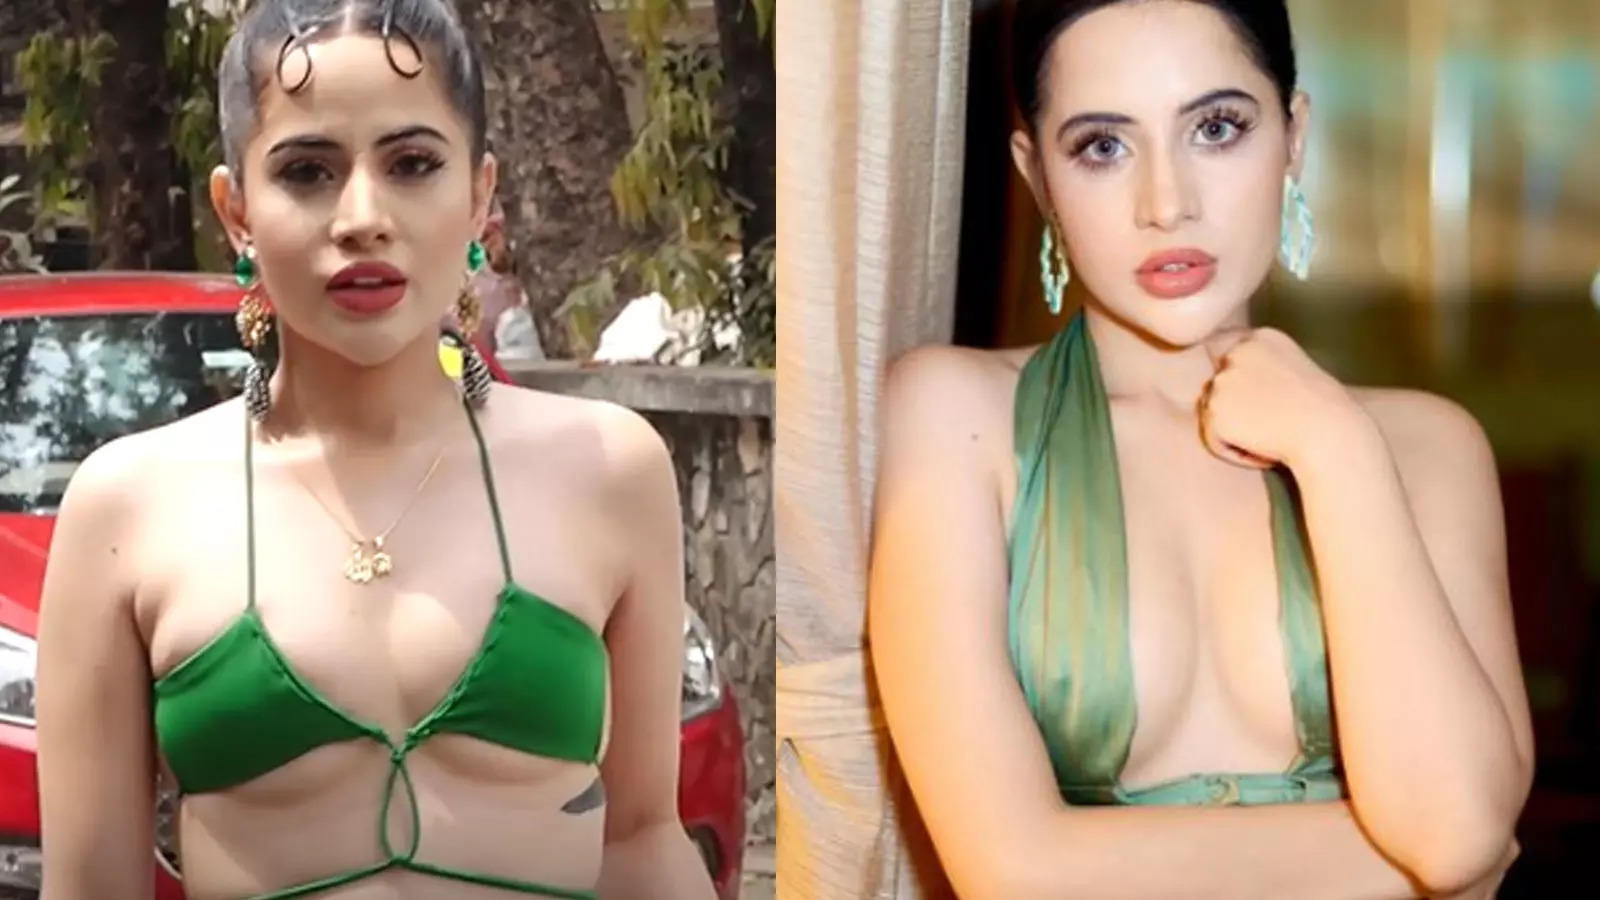 Moon Moon Dutta Porn Videos - Urrfii Javed reveals her picture was uploaded on porn site when she was 15:  'People really slut shamed me' | Hindi Movie News - Bollywood - Times of  India